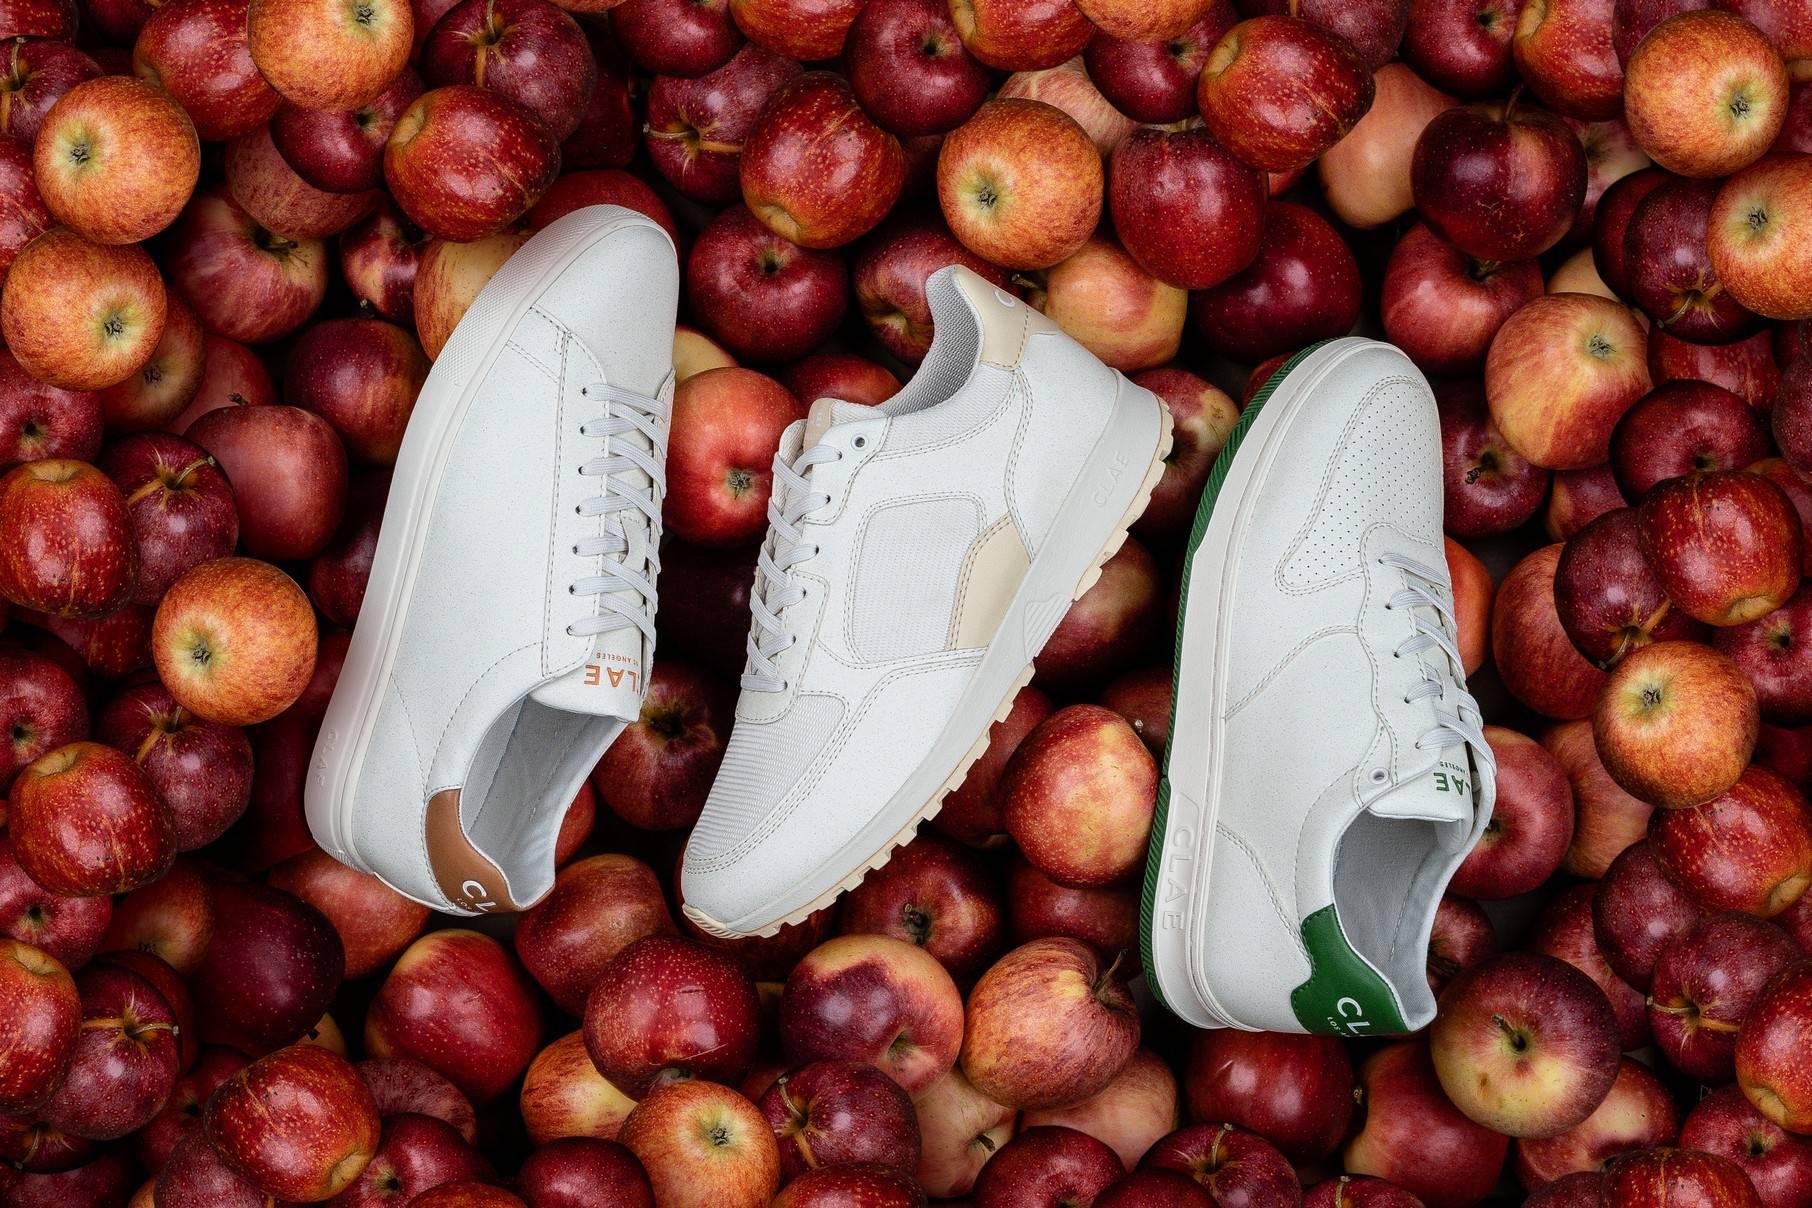 The Apple Collection - CLAE Footwear